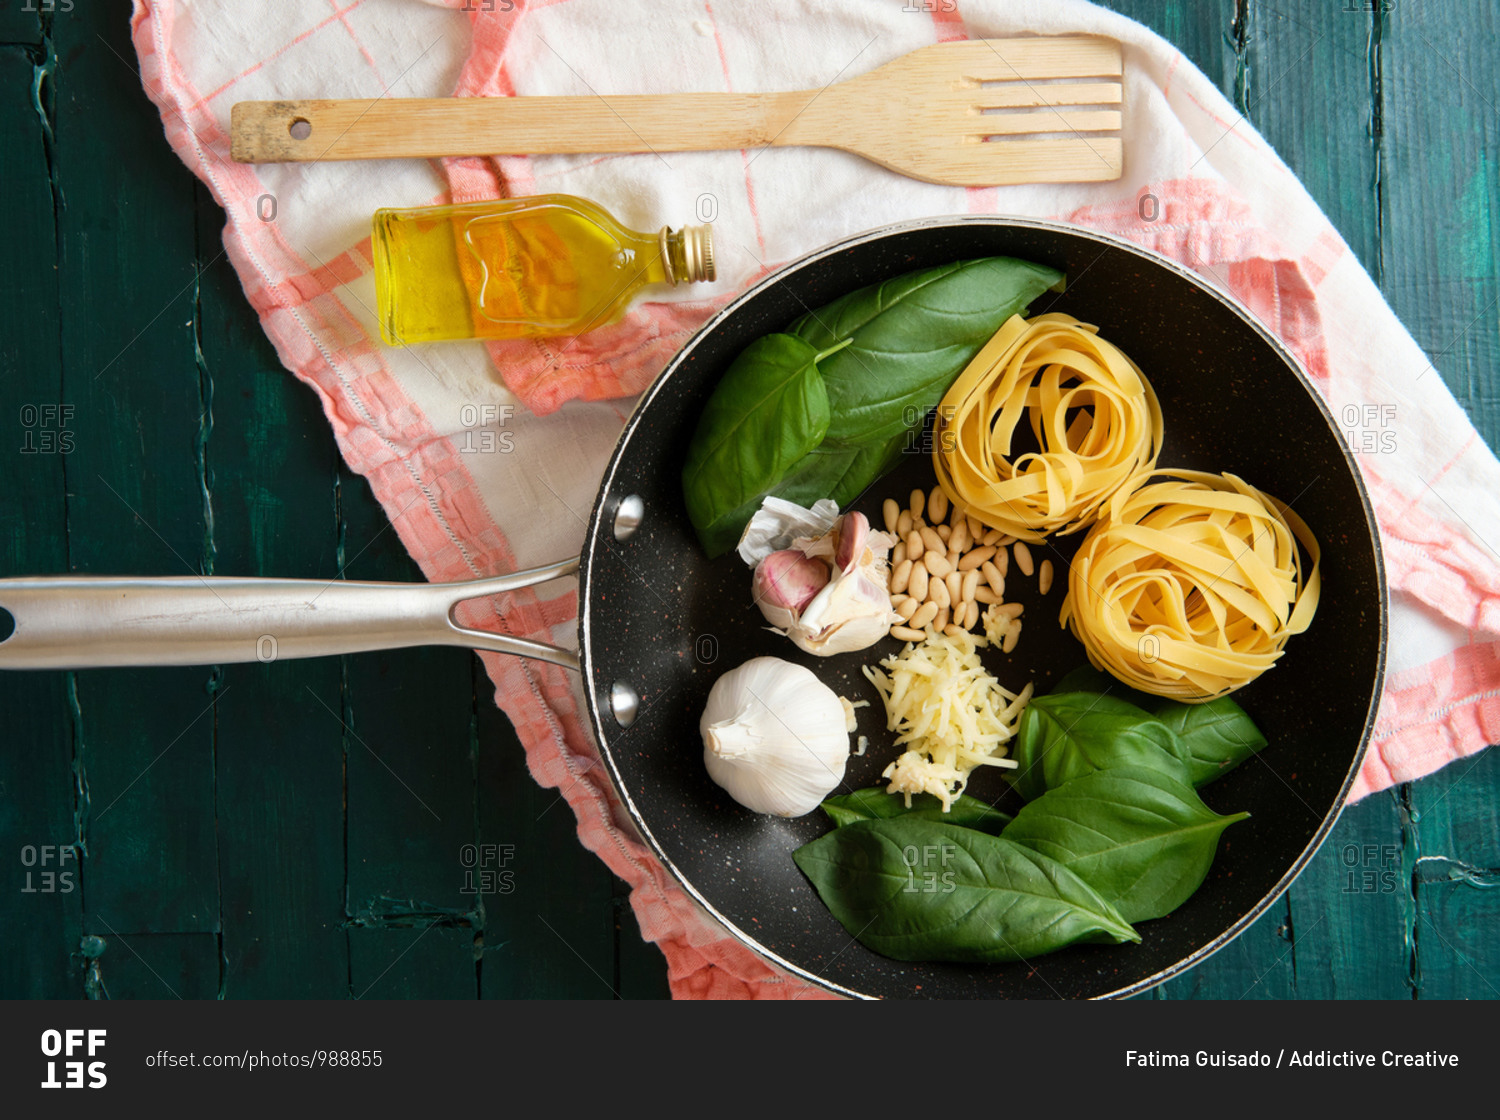 Top view of frying pen with uncooked pasta rolls near fresh basil leaves and heads of garlic with pine nuts and bottle of olive oil near wooden spatula on towel